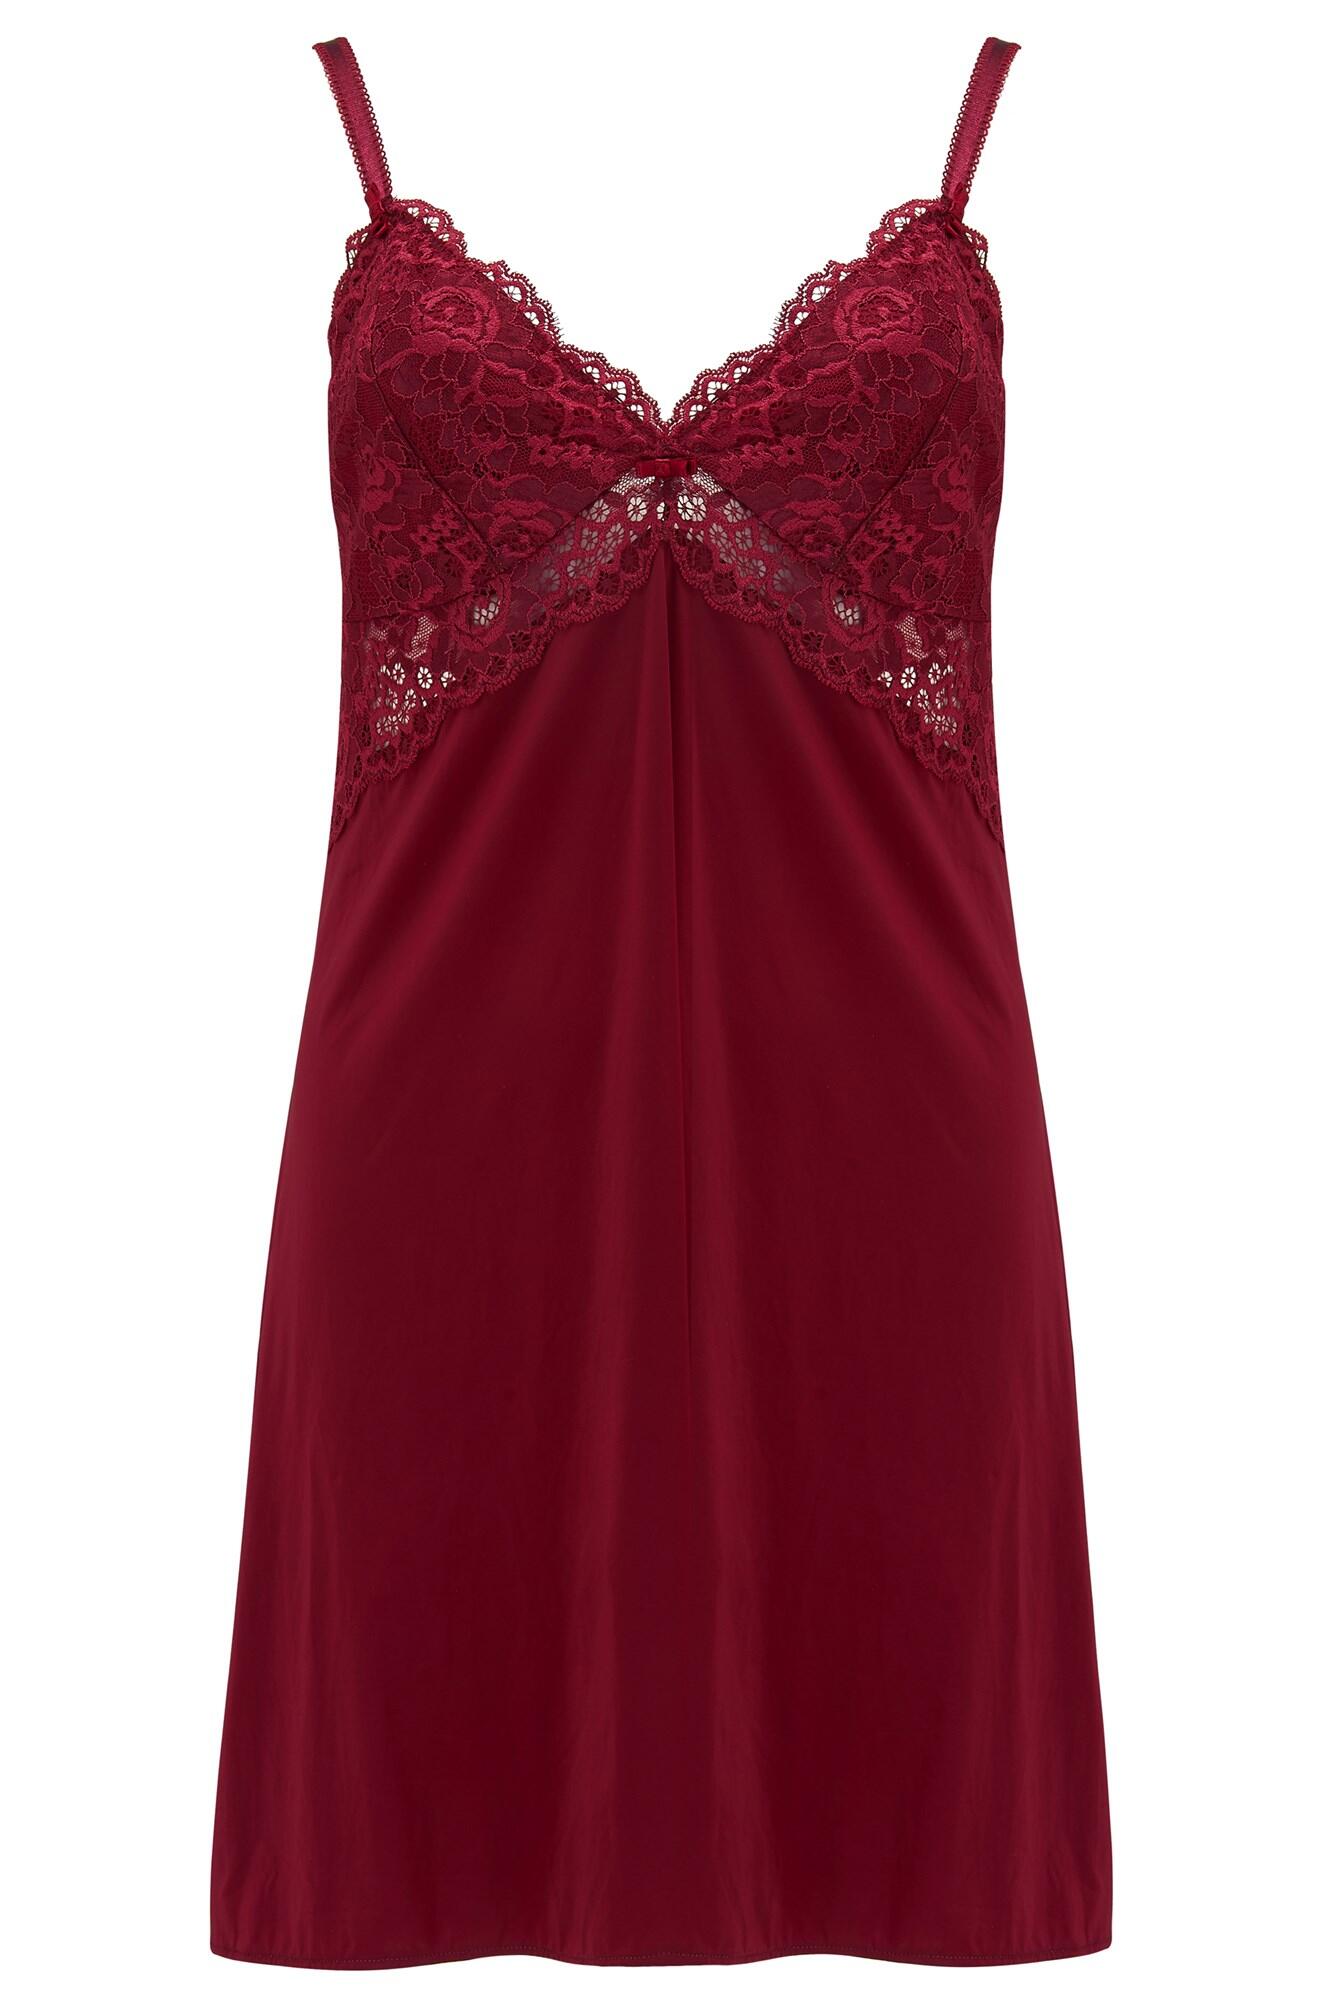 Opulence Lace Chemise in Deep Red | Pour Moi